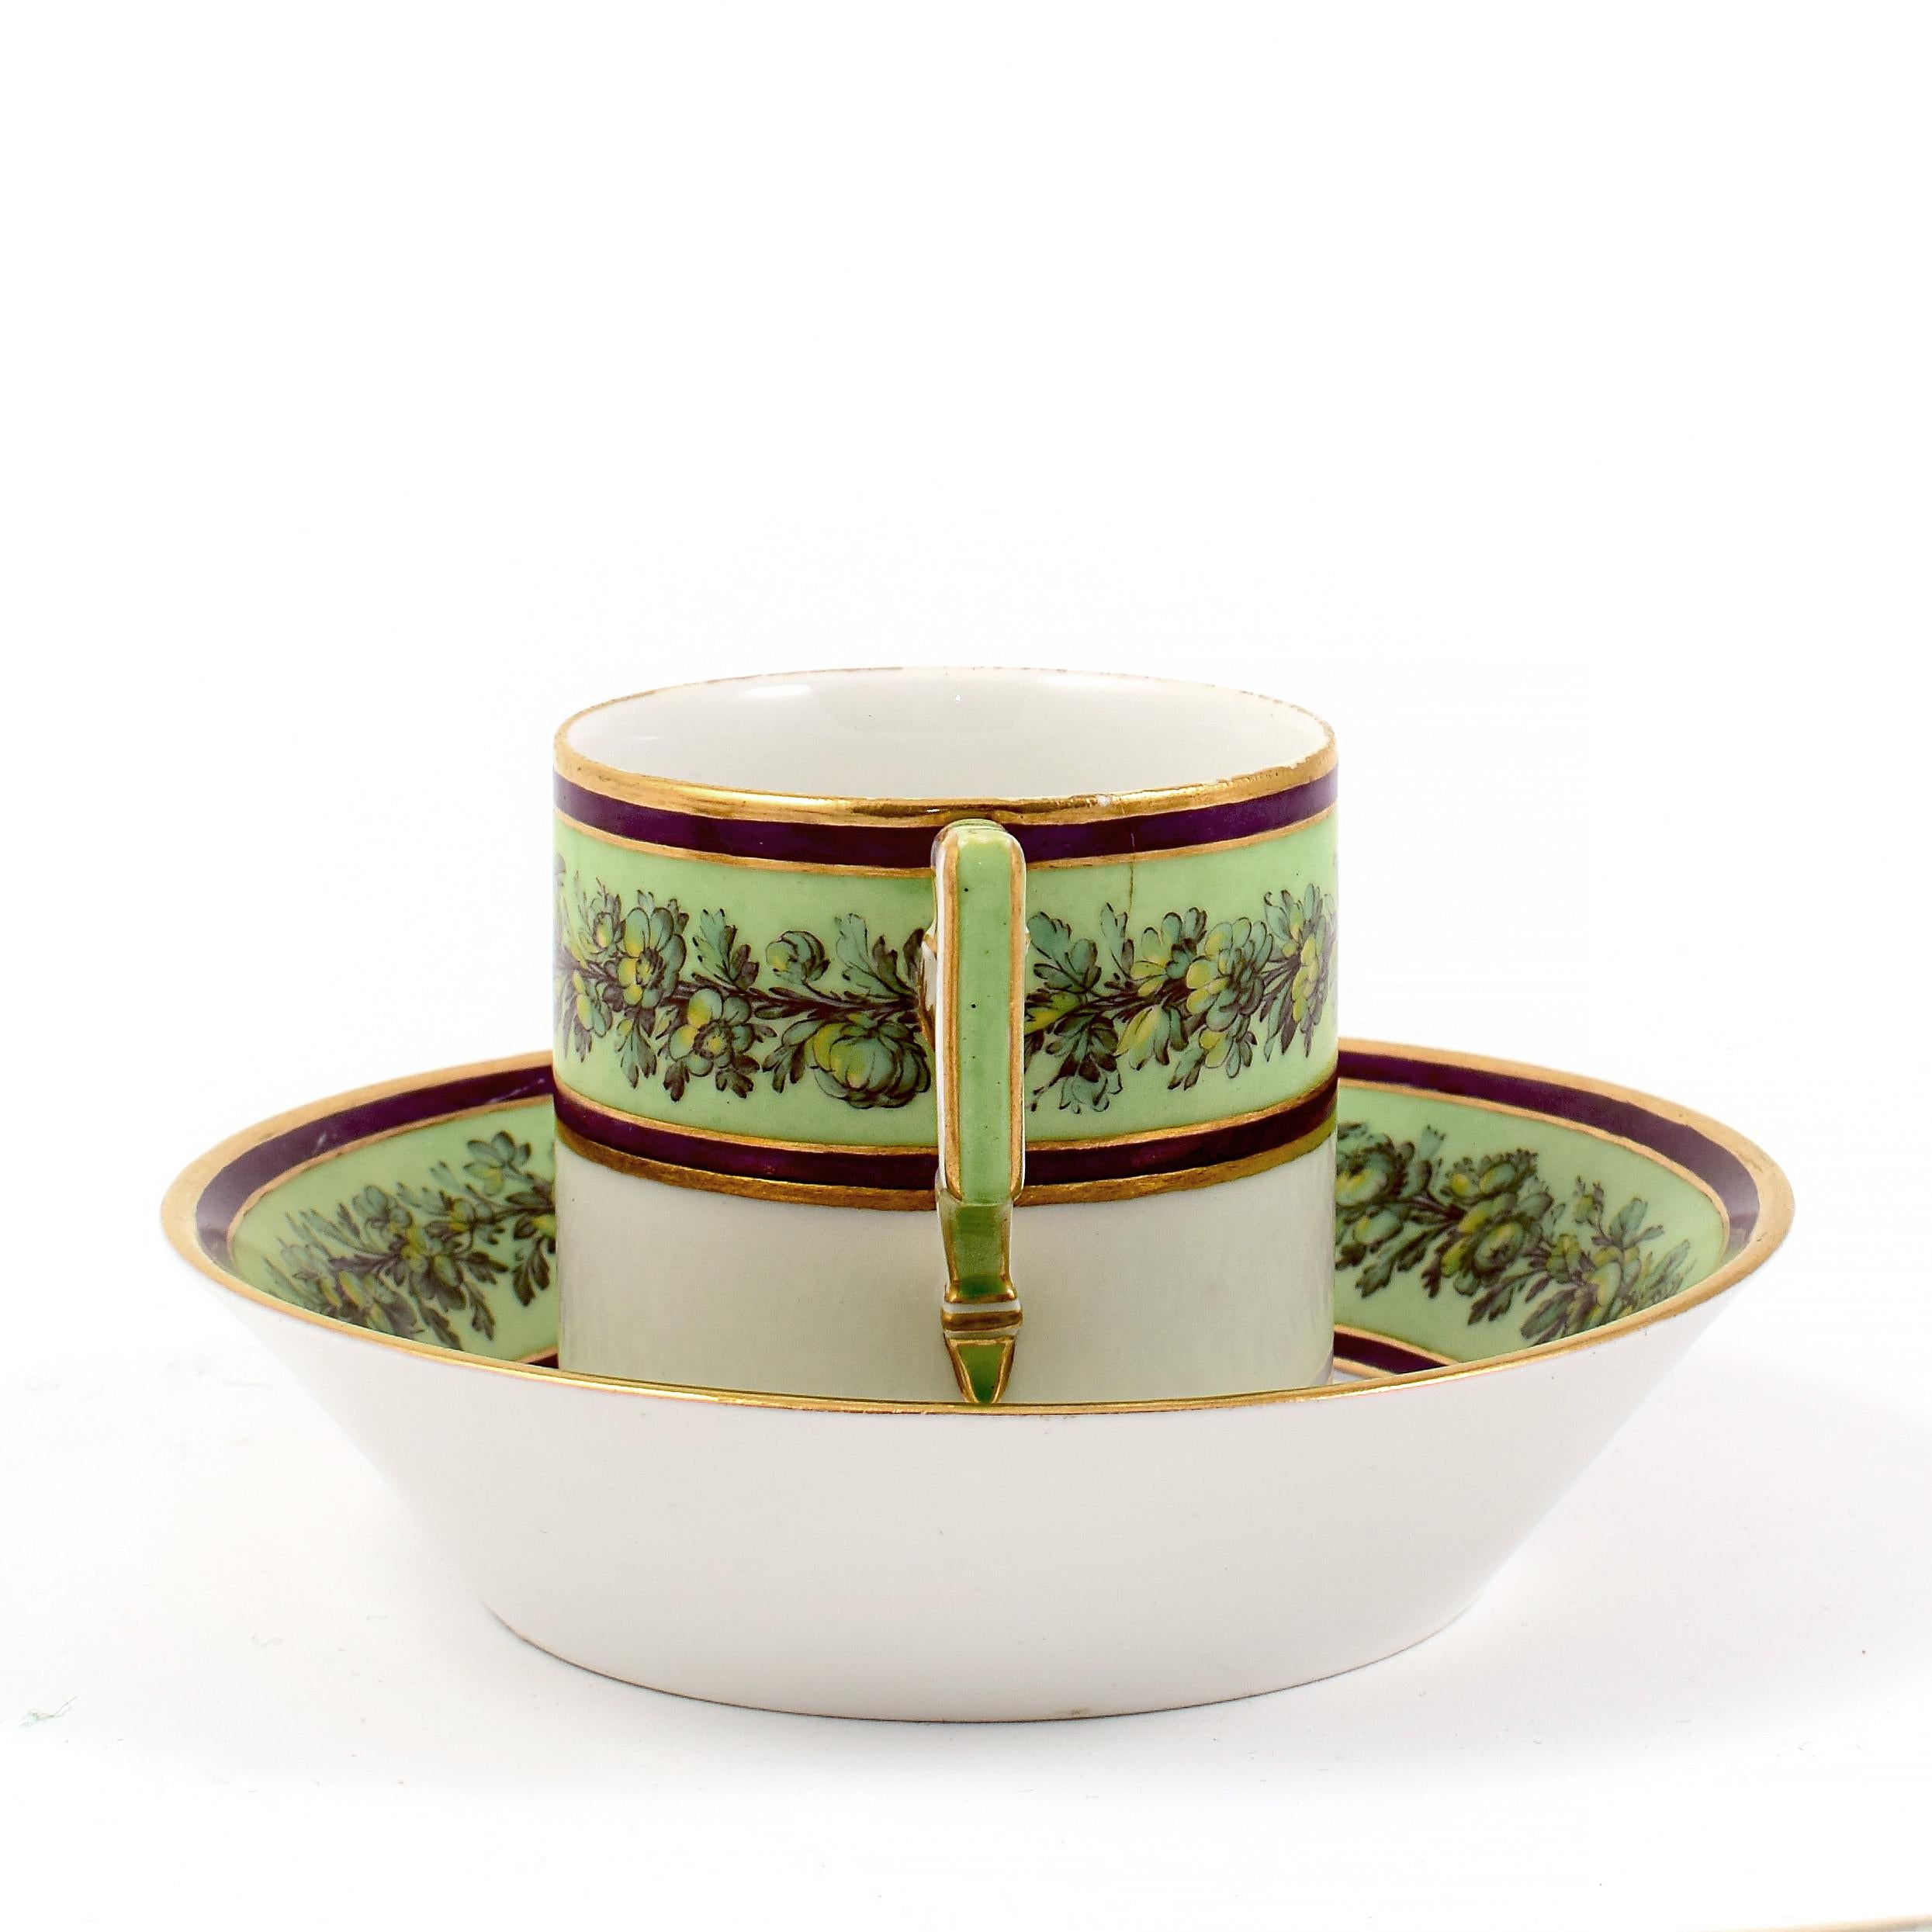 Early 19th Century KPM Empire Porcelain Cup and Saucer Decorated with a Green Flower Border